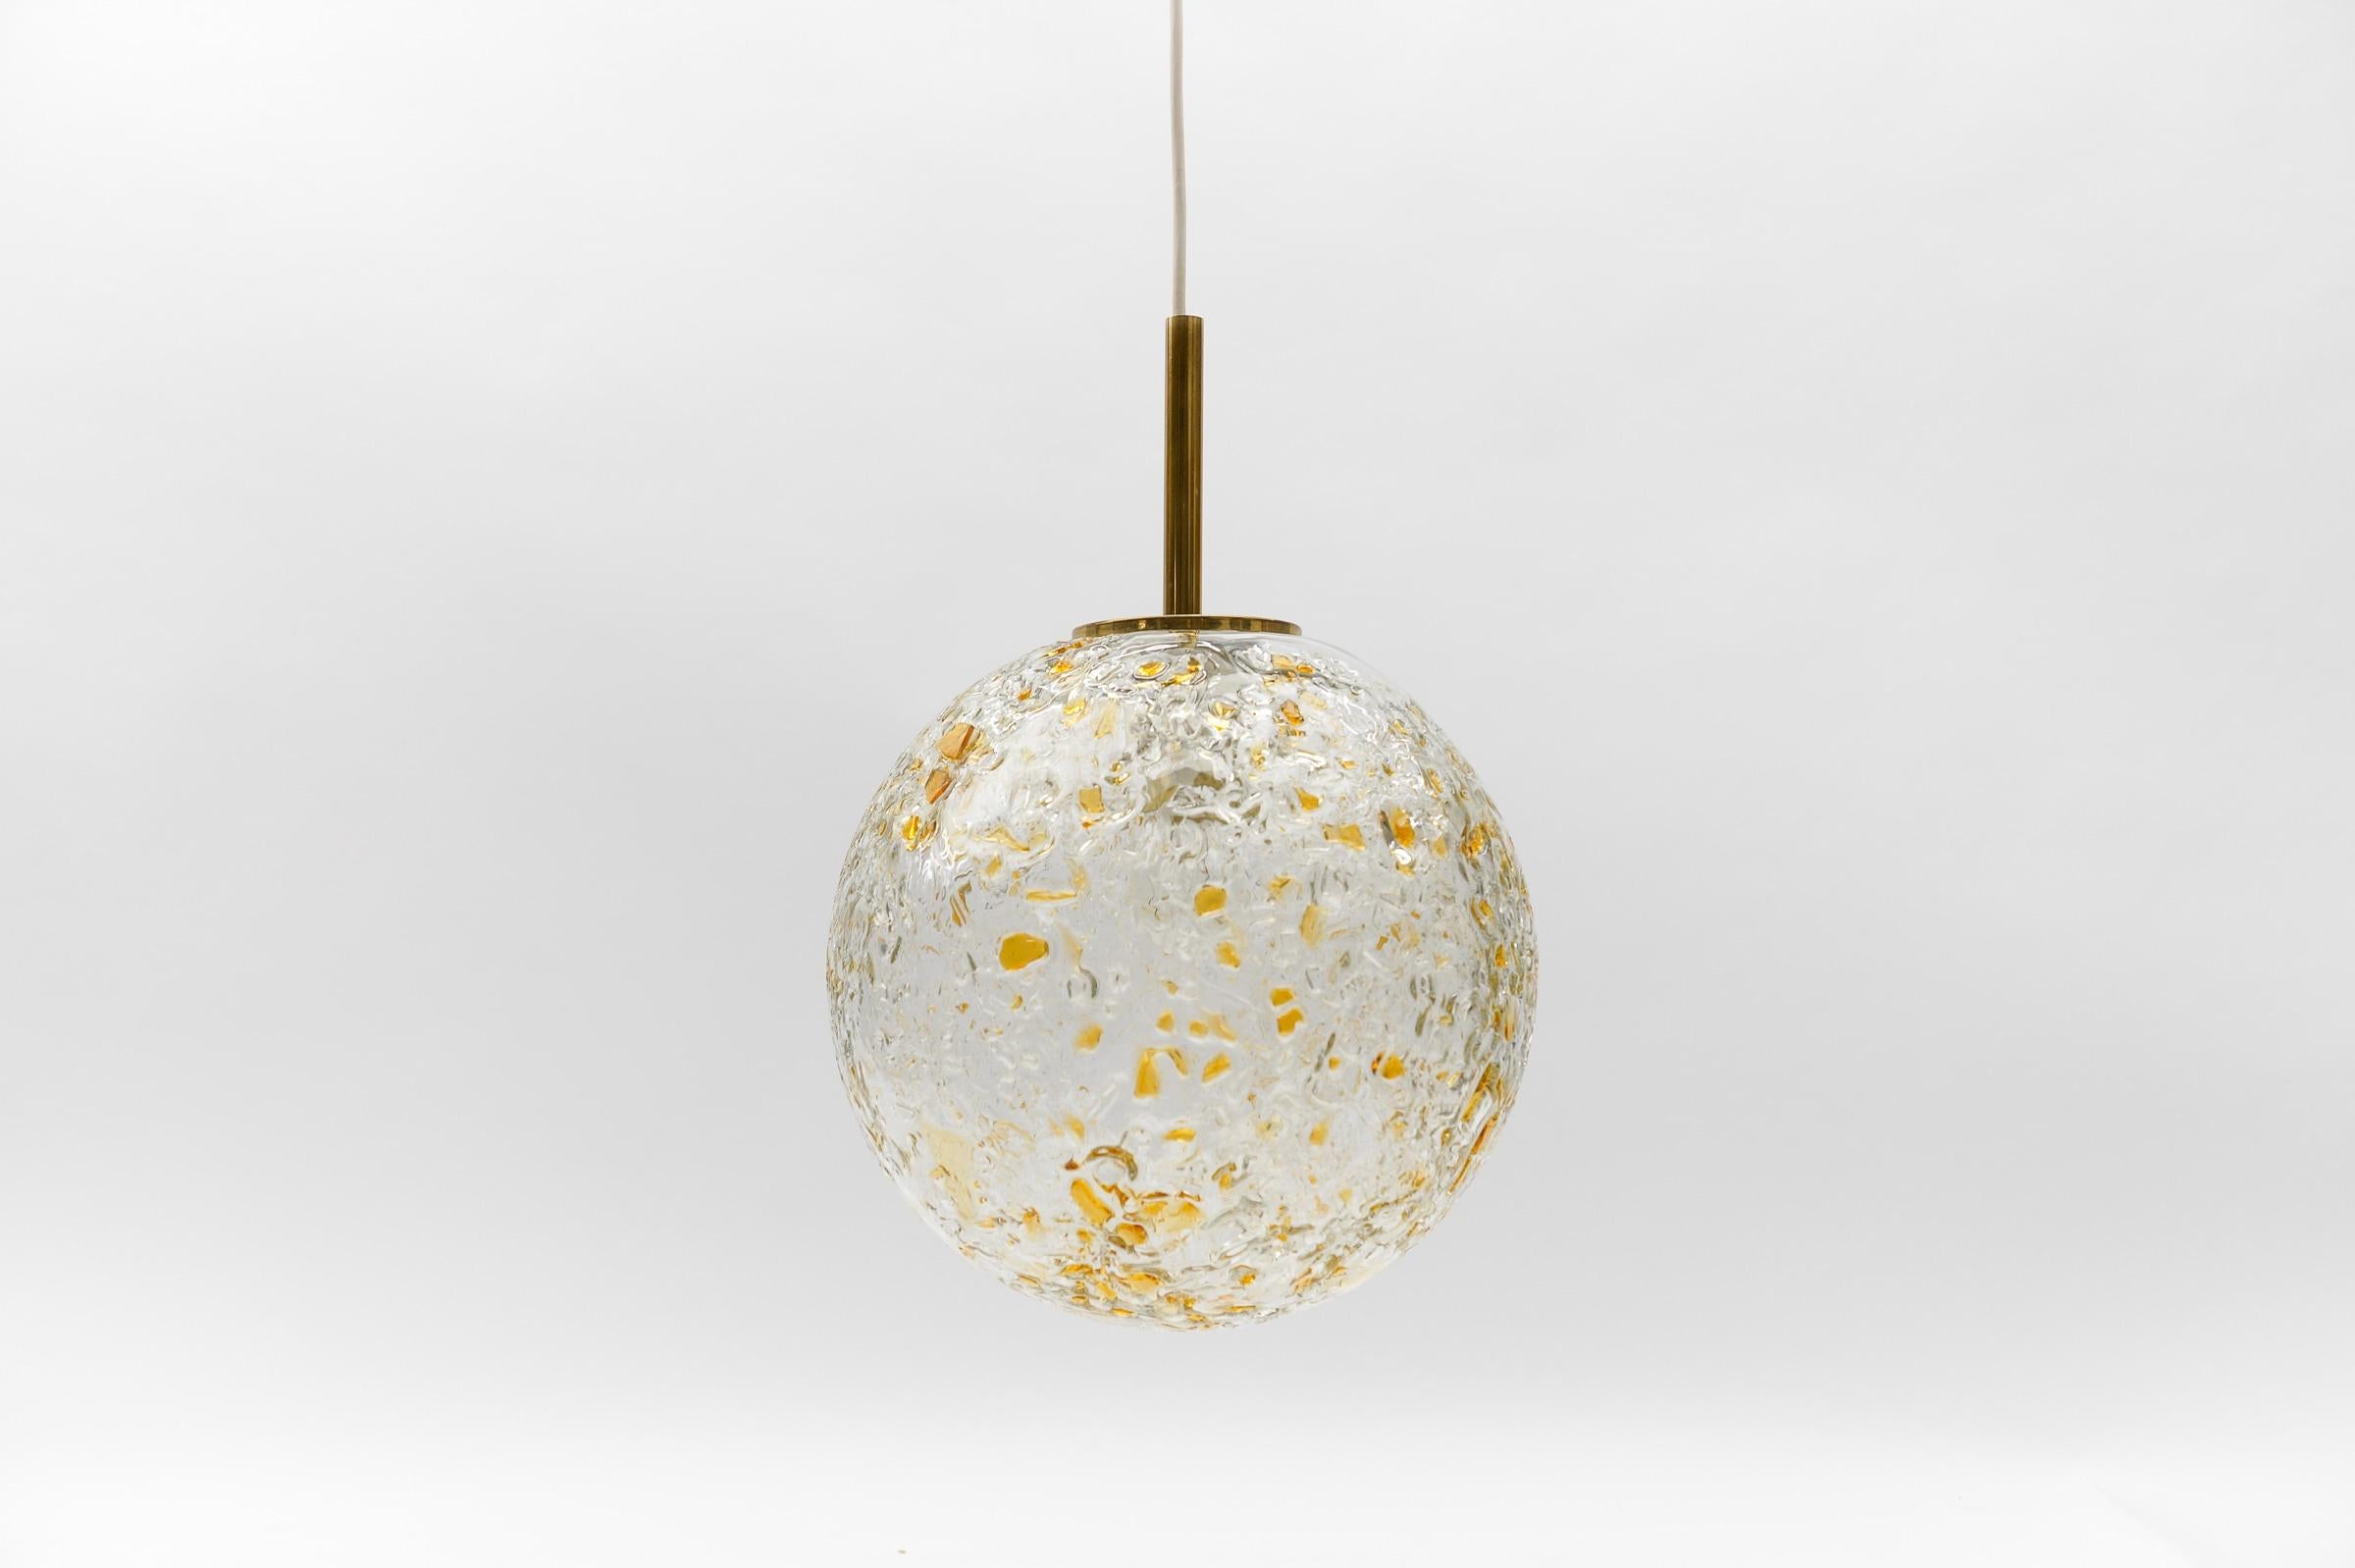 Lovely Mid-Century Modern Glass Ball Pendant Lamp by Doria, 1960s Germany In Good Condition For Sale In Nürnberg, Bayern